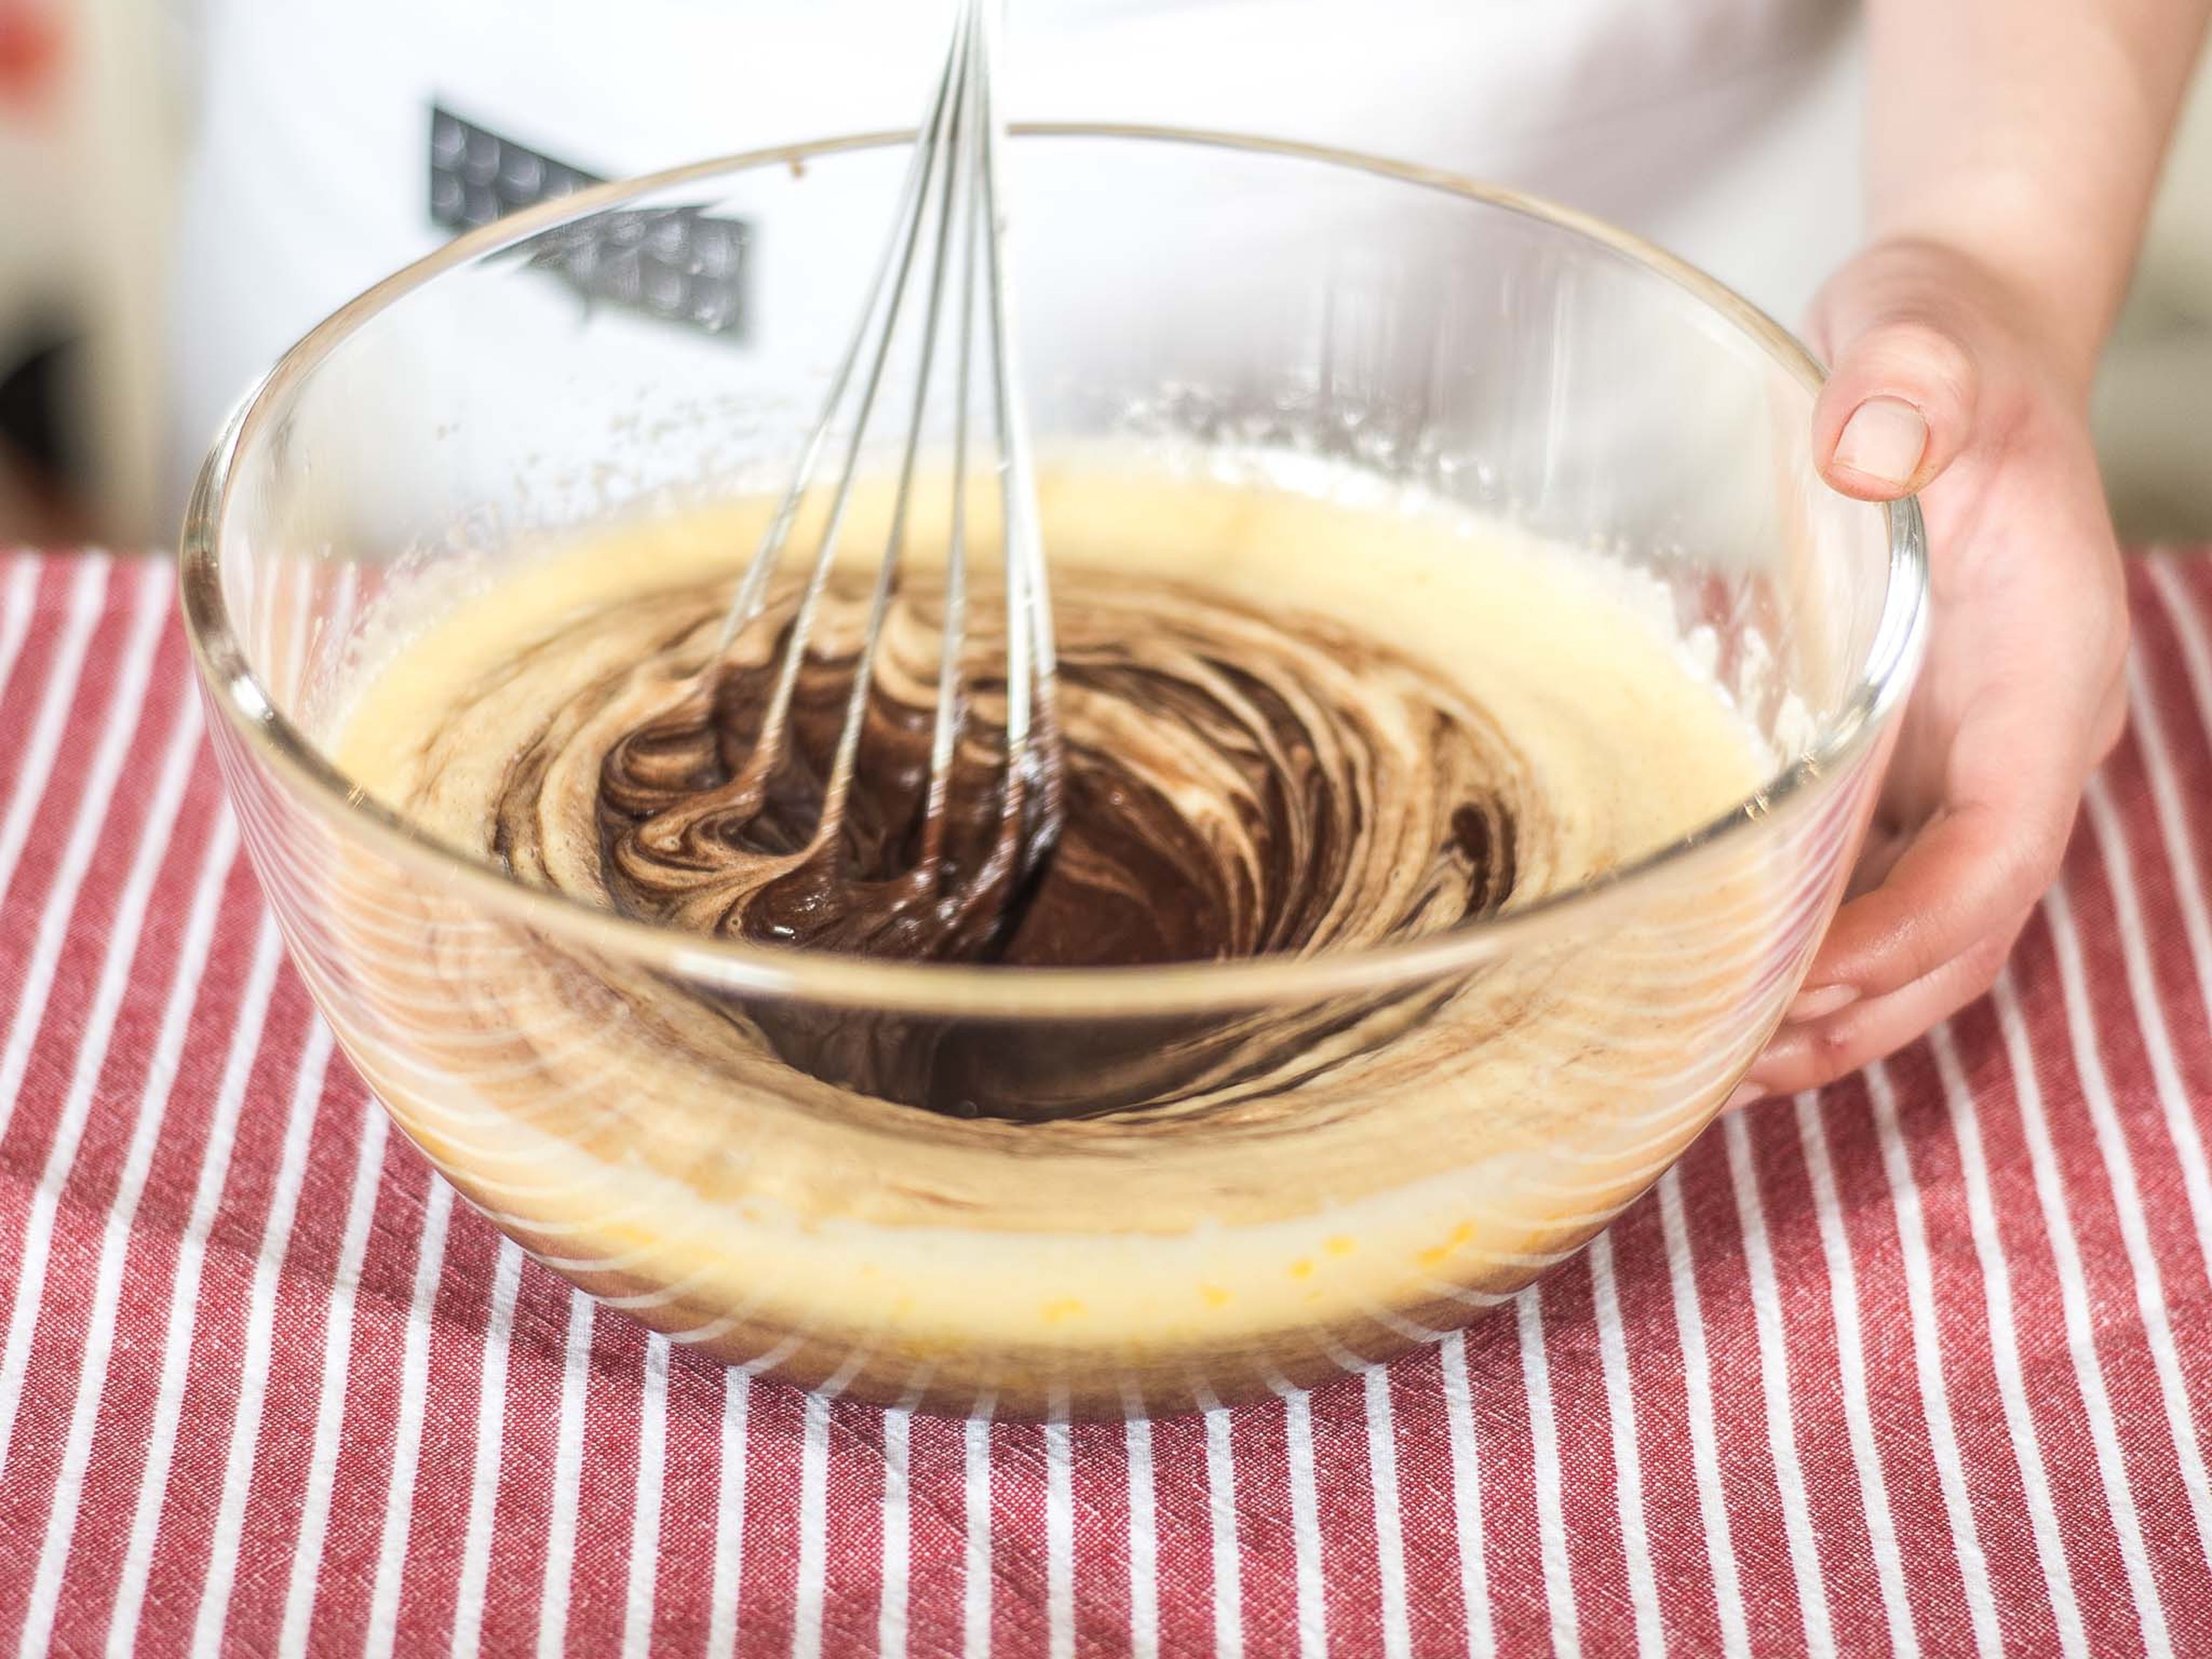 Next, add the melted chocolate to the egg mixture and stir together until a smooth batter forms.